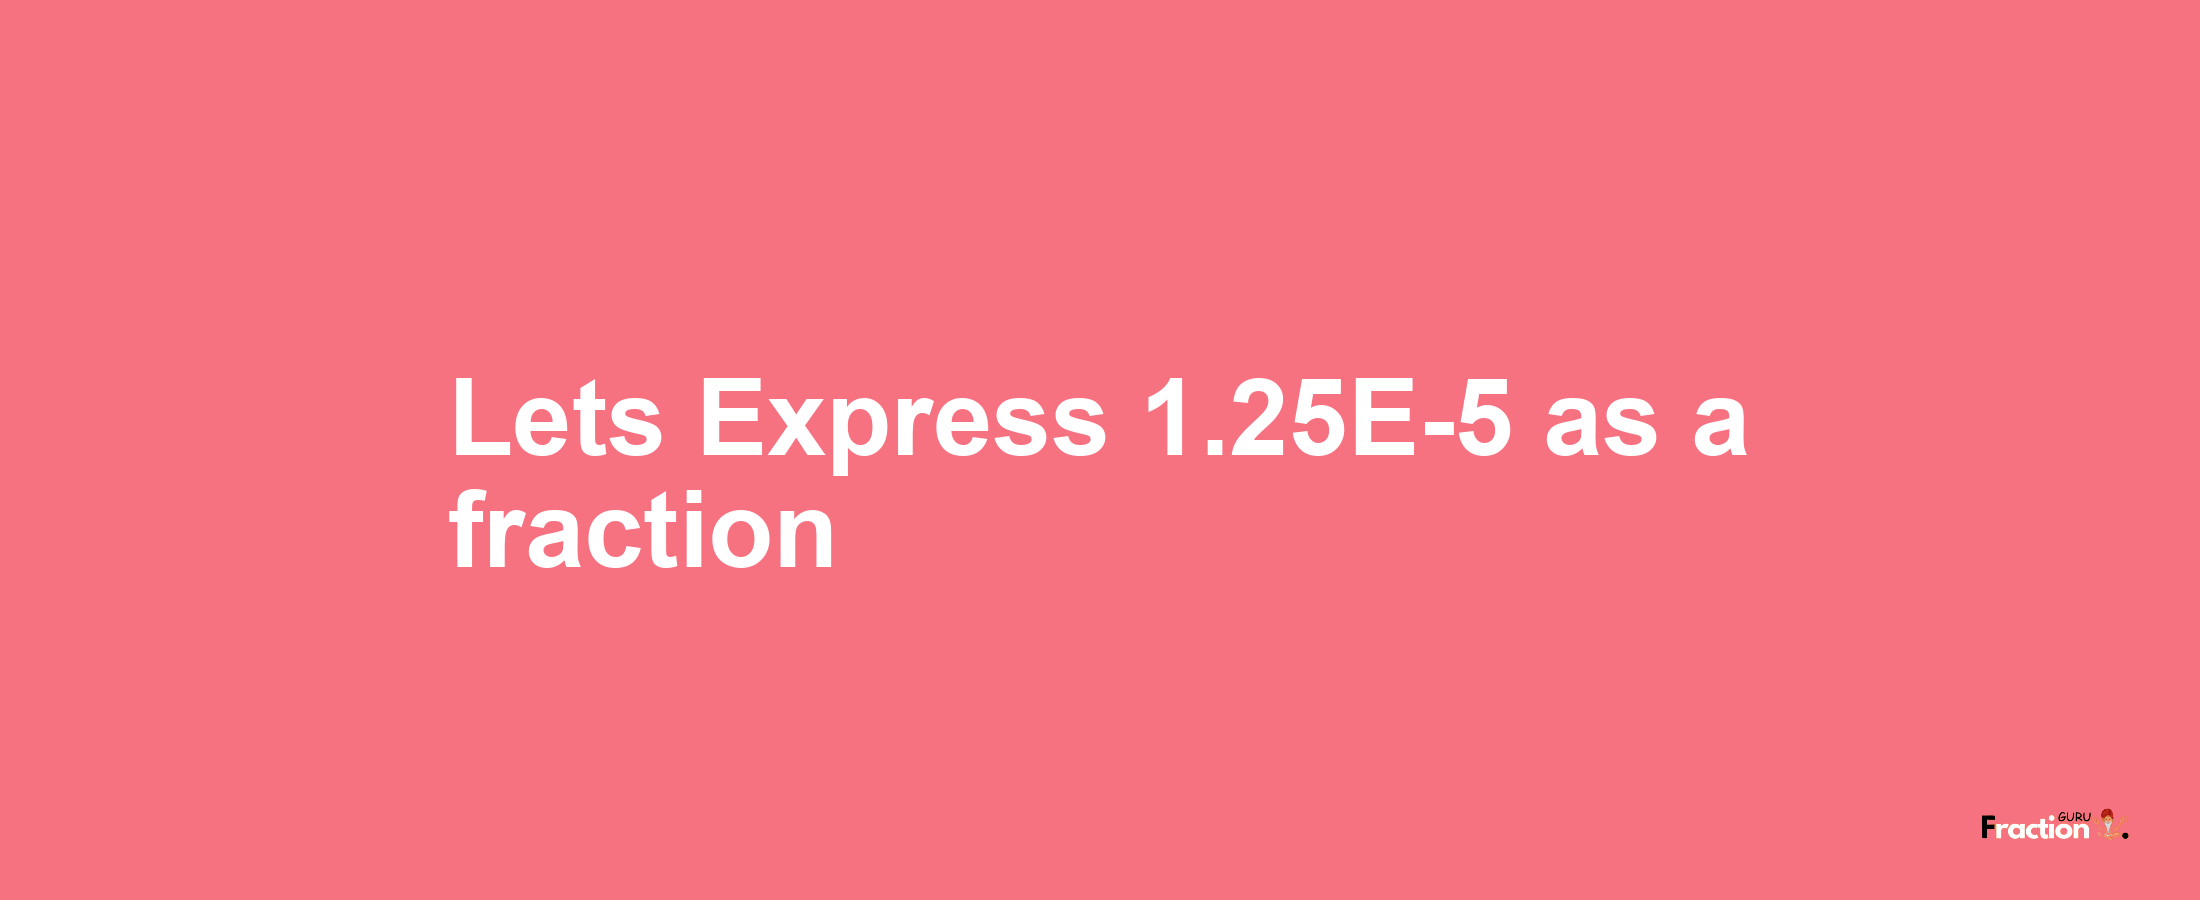 Lets Express 1.25E-5 as afraction